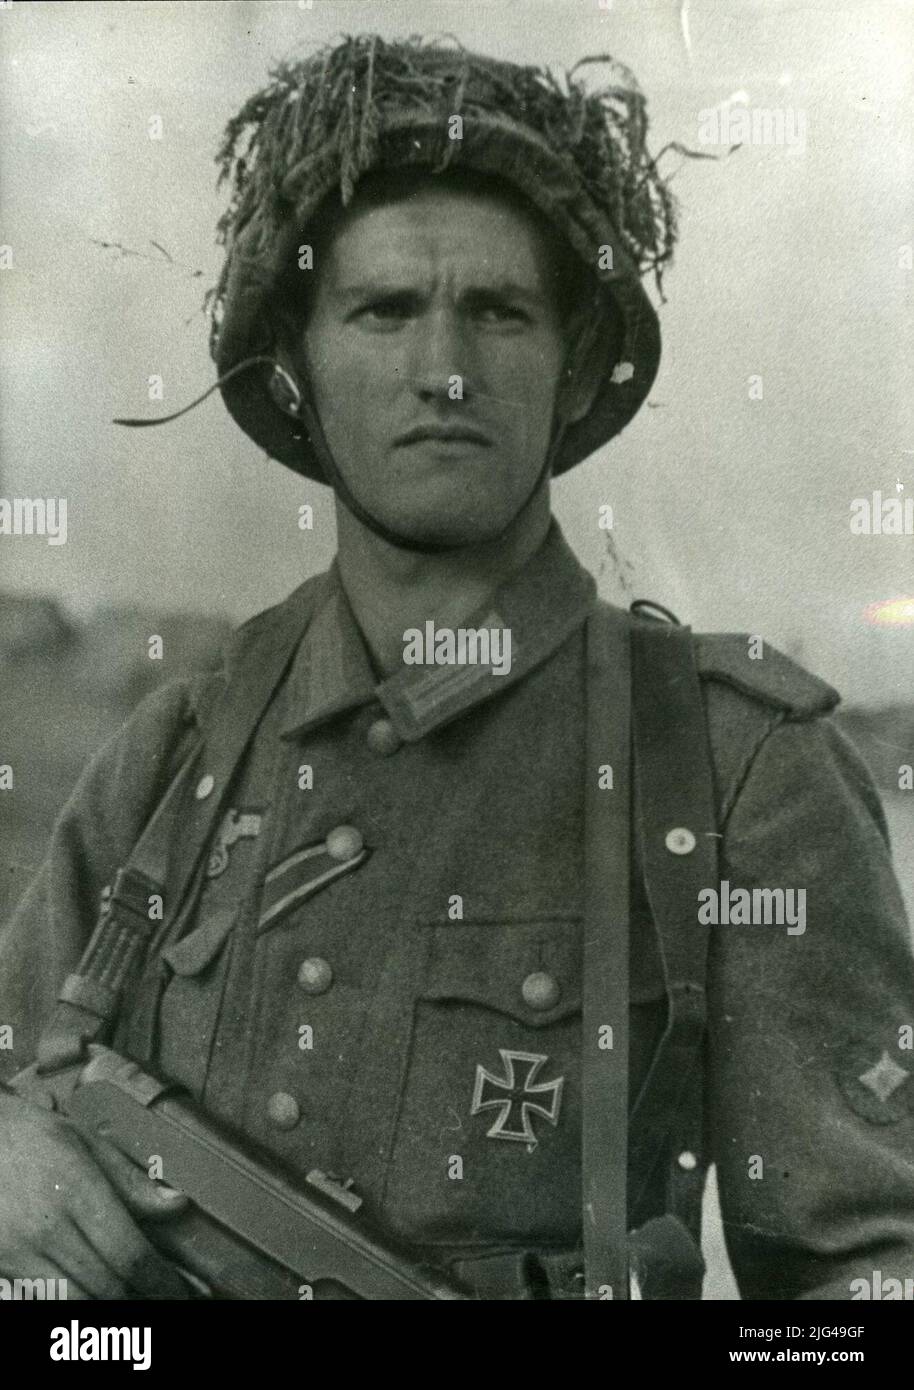 1st Soldier (OberSchütze). Leningrad Front of 1st soldier (Oberschütze) with distinctive on his left arm, wears German uniform with eagle on his right pocket. He has the 1st class iron cross and the 2nd class, placed in the Spanish style (Warrior and Cross button on the left pocket of the warrior). M35 helmet, masked with herbs. He carries to the subfusil neck MP40. Stock Photo